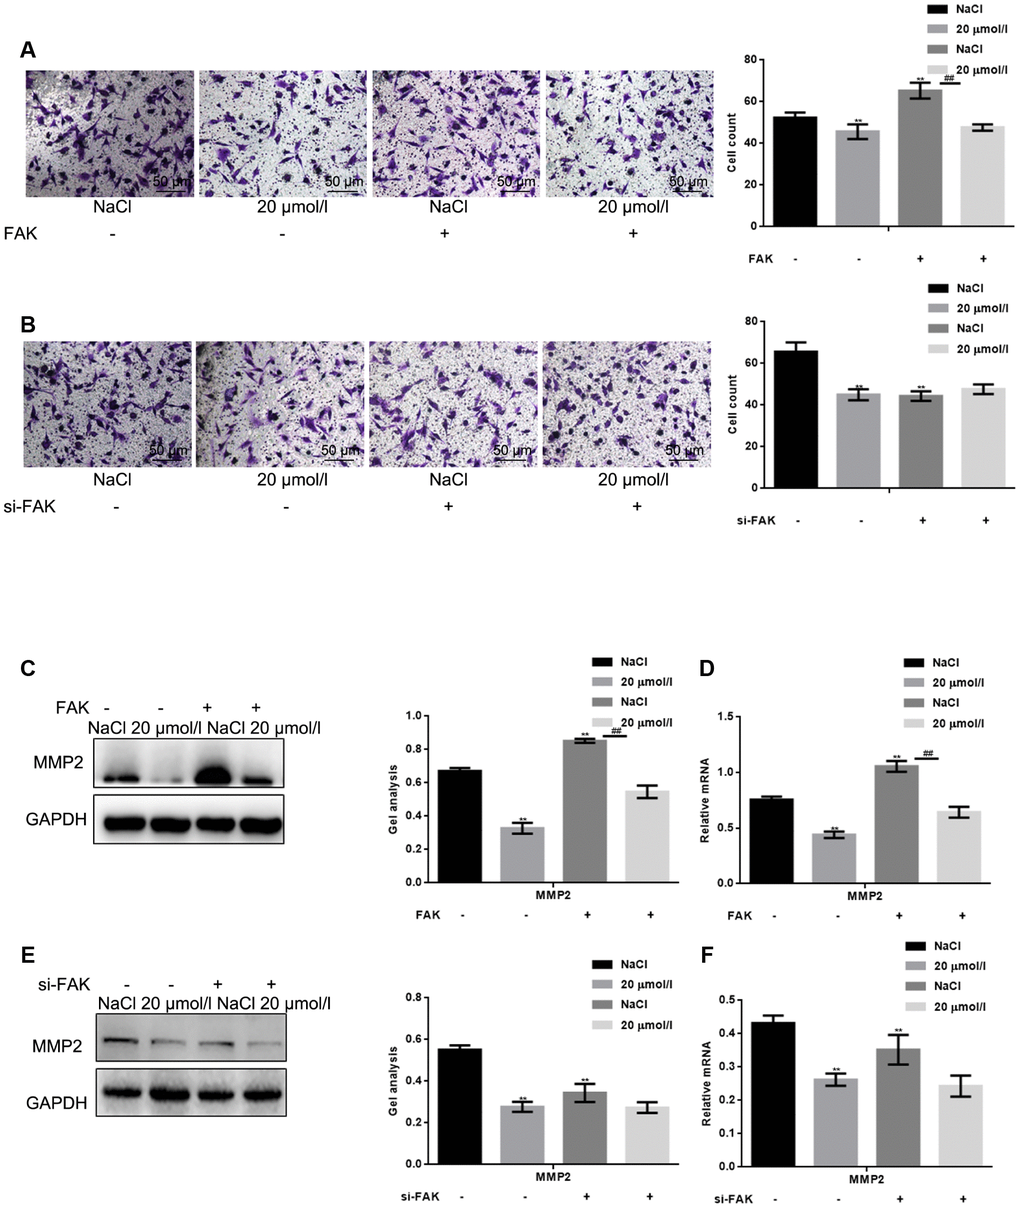 Apigenin inhibits HSF migration by suppressing FAK phosphorylation. (A) Transwell assays (without Matrigel) with HSFs overexpressing vector or FAK and treated with 20 μM apigenin,. **P P B) Transwell assays (without Matrigel) with HSFs transfected with si-FAK or si-NC (negative control) and treated with 20 μM apigenin. **P C, D) HSFs overexpressing vector or FAK were treated with 20 μM apigenin, after which western blot and real-time PCR assays were performed to detect levels of MMP2 expression. **P P E, F) HSFs transfected with si-FAK or si-NC (negative control) were treated with 20 μM apigenin, after which western blot and real-time PCR assays were performed to detect levels of MMP2expression. **P 